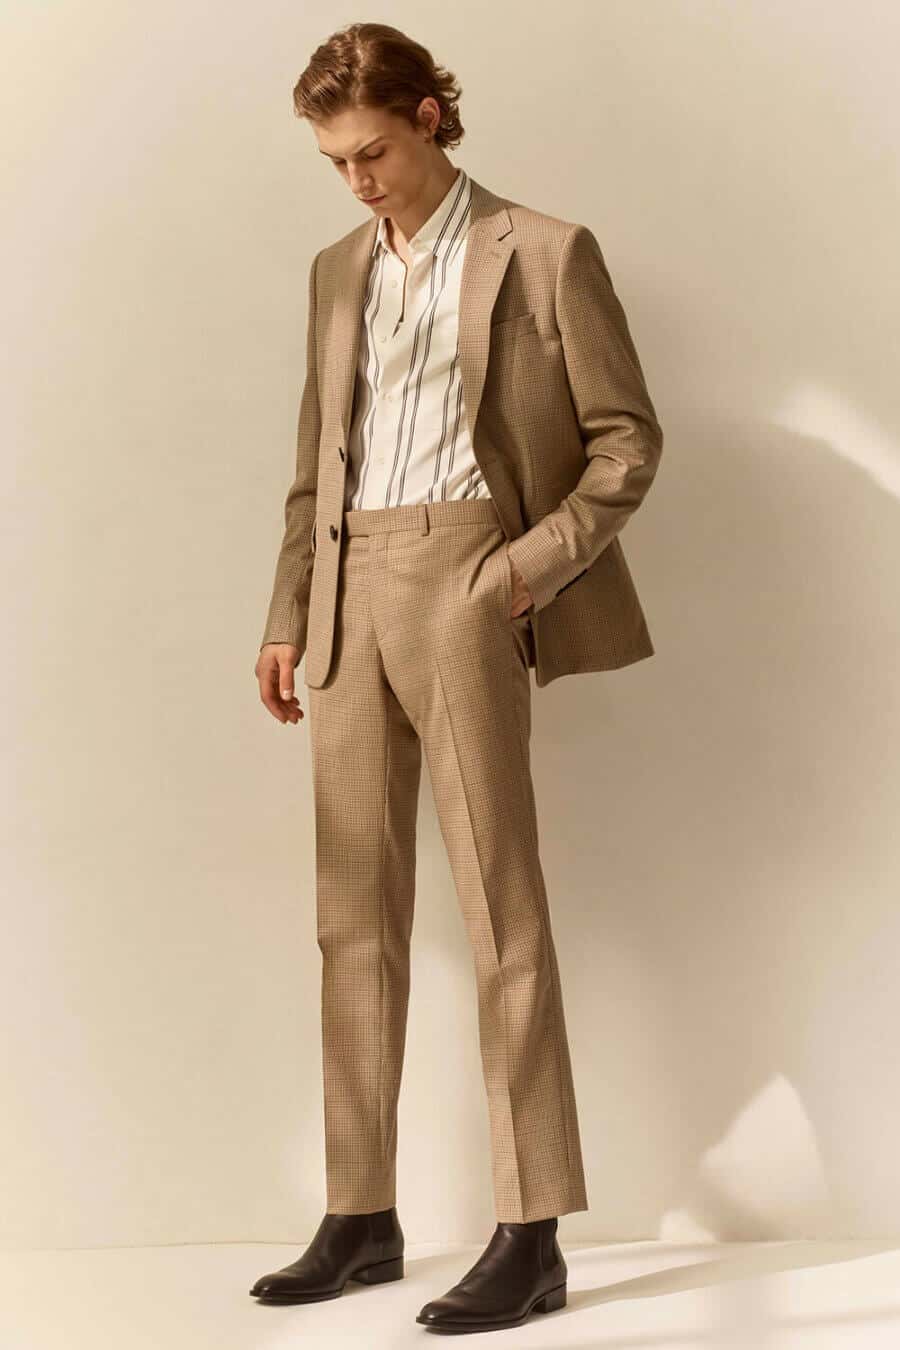 Men's camel suit and striped shirt with brown chelsea boots